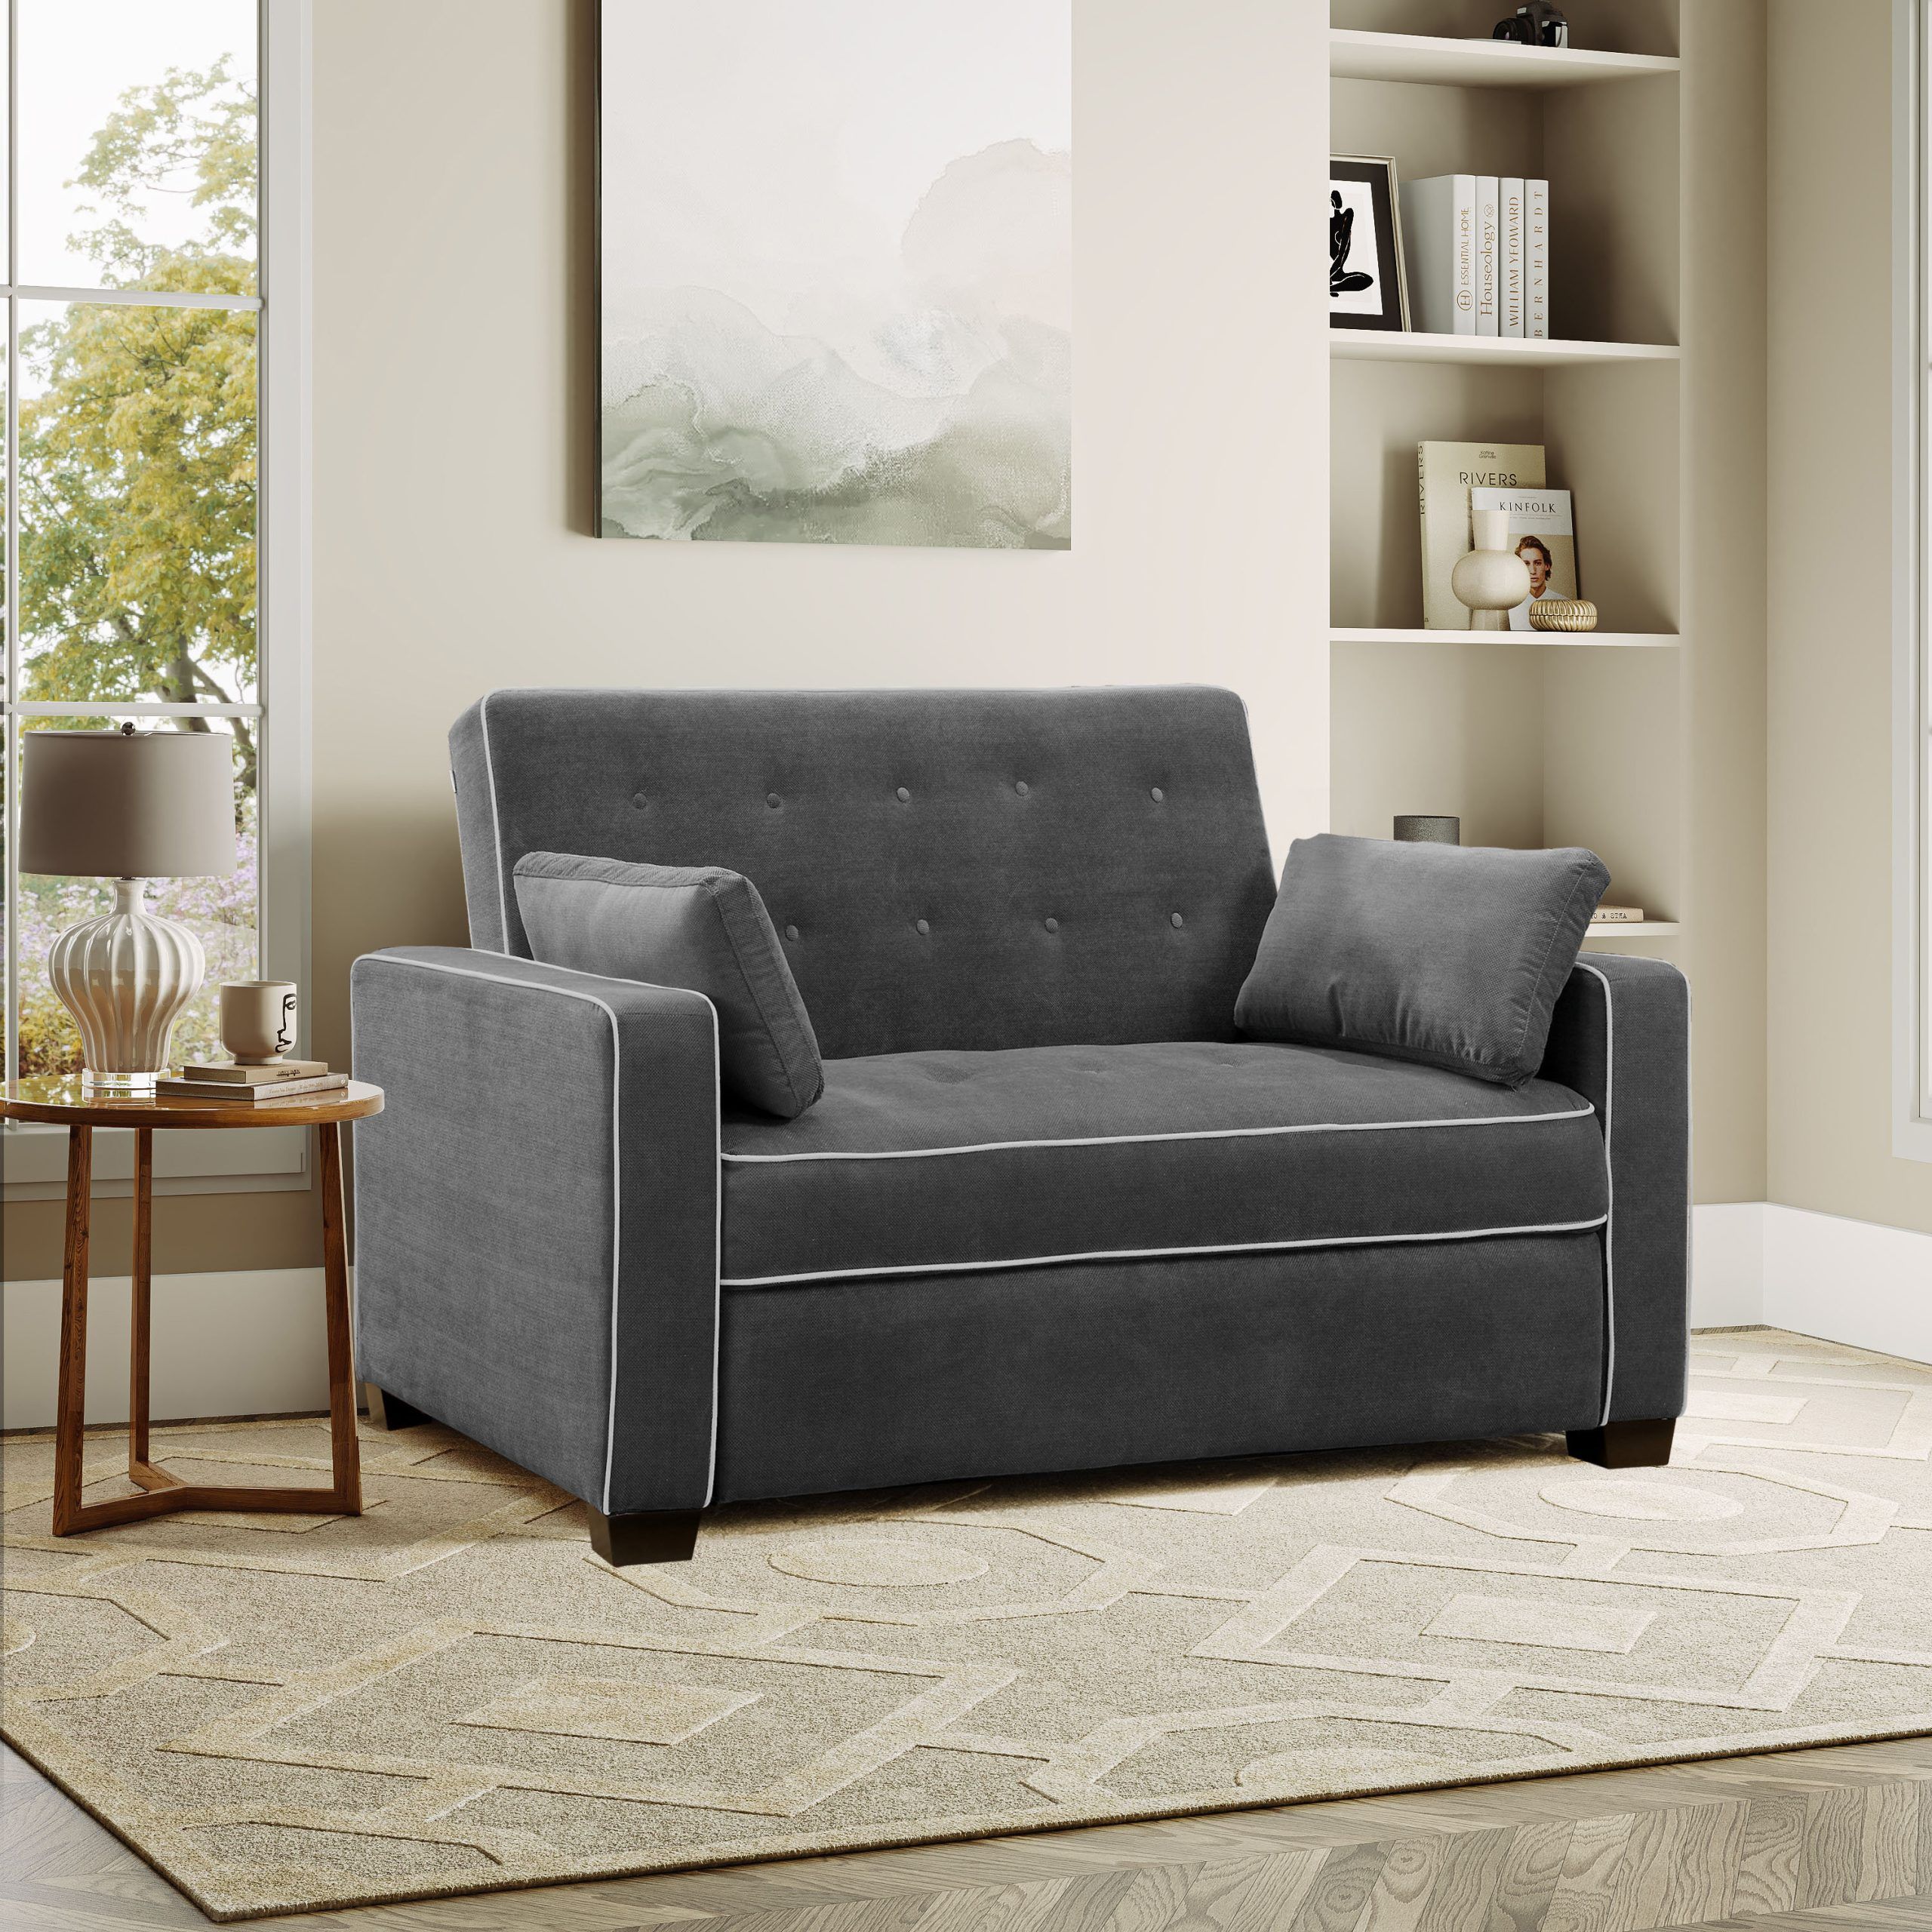 Serta Monroe Full Size Convertible Sleeper Sofa With Cushions & Reviews |  Wayfair With Regard To Convertible Gray Loveseat Sleepers (View 12 of 15)